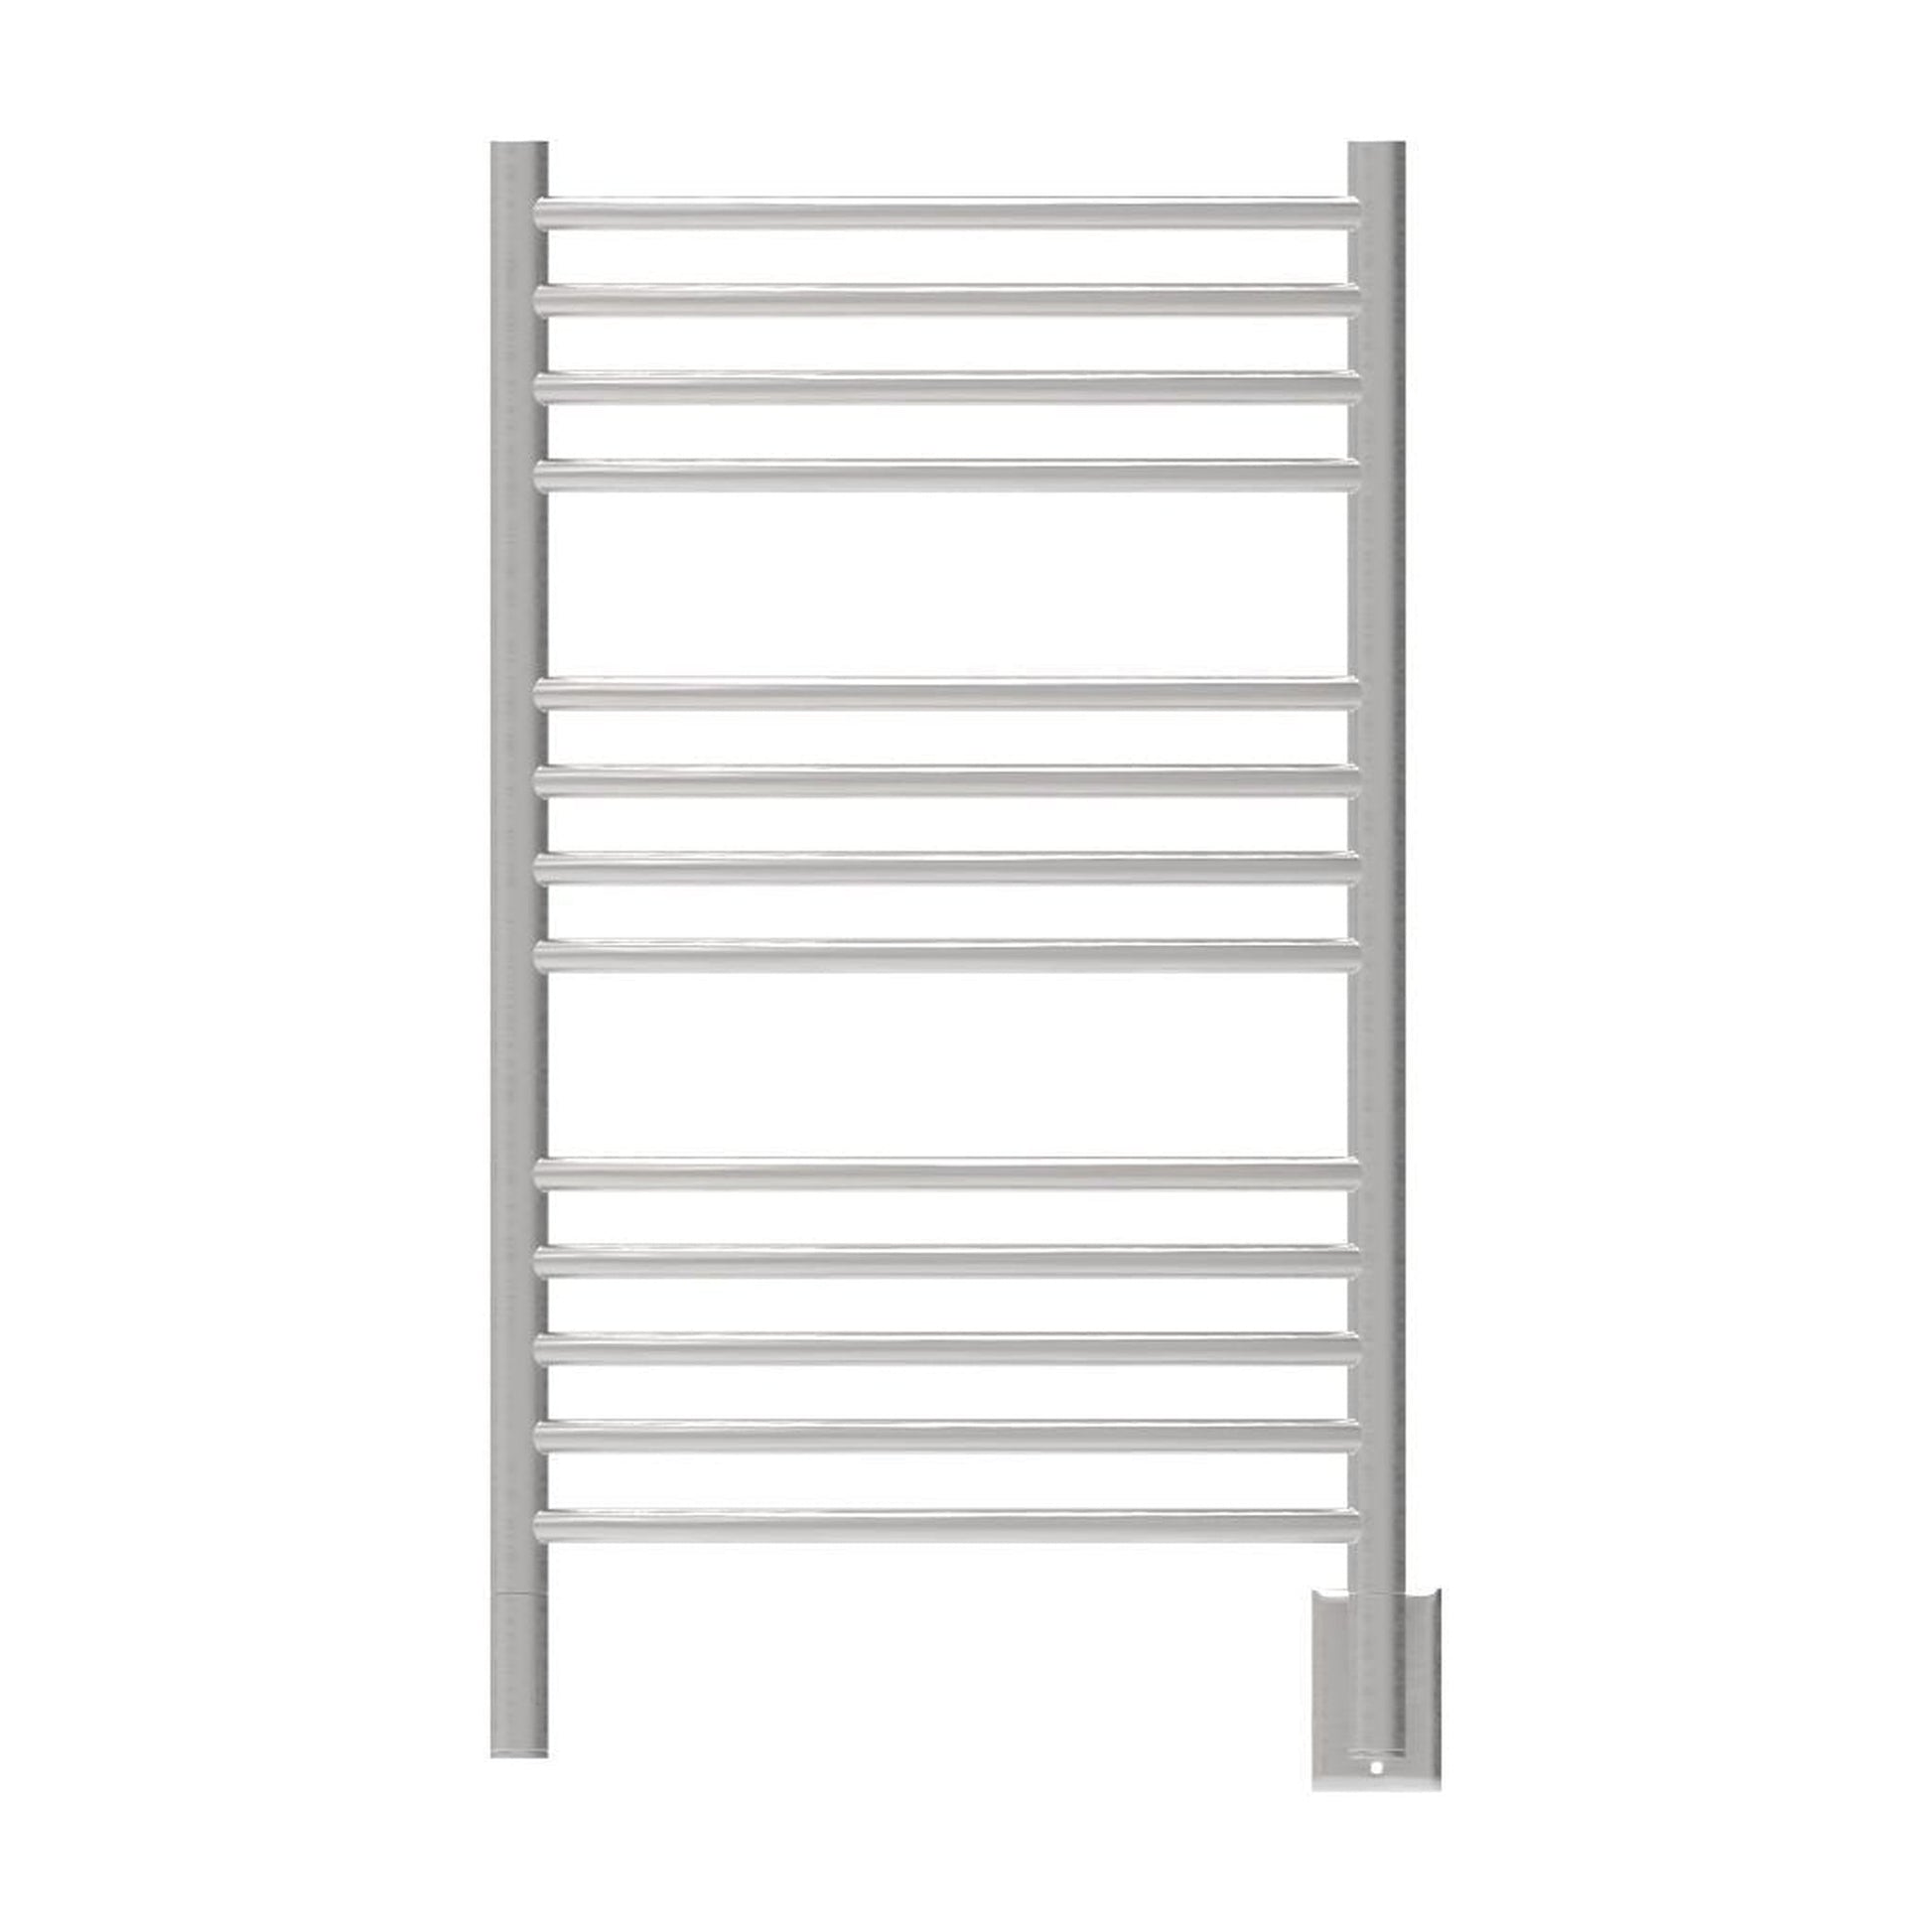 Amba Jeeves C Curved 13-Bar Brushed Stainless Steel Finish Hardwired Towel Warmer